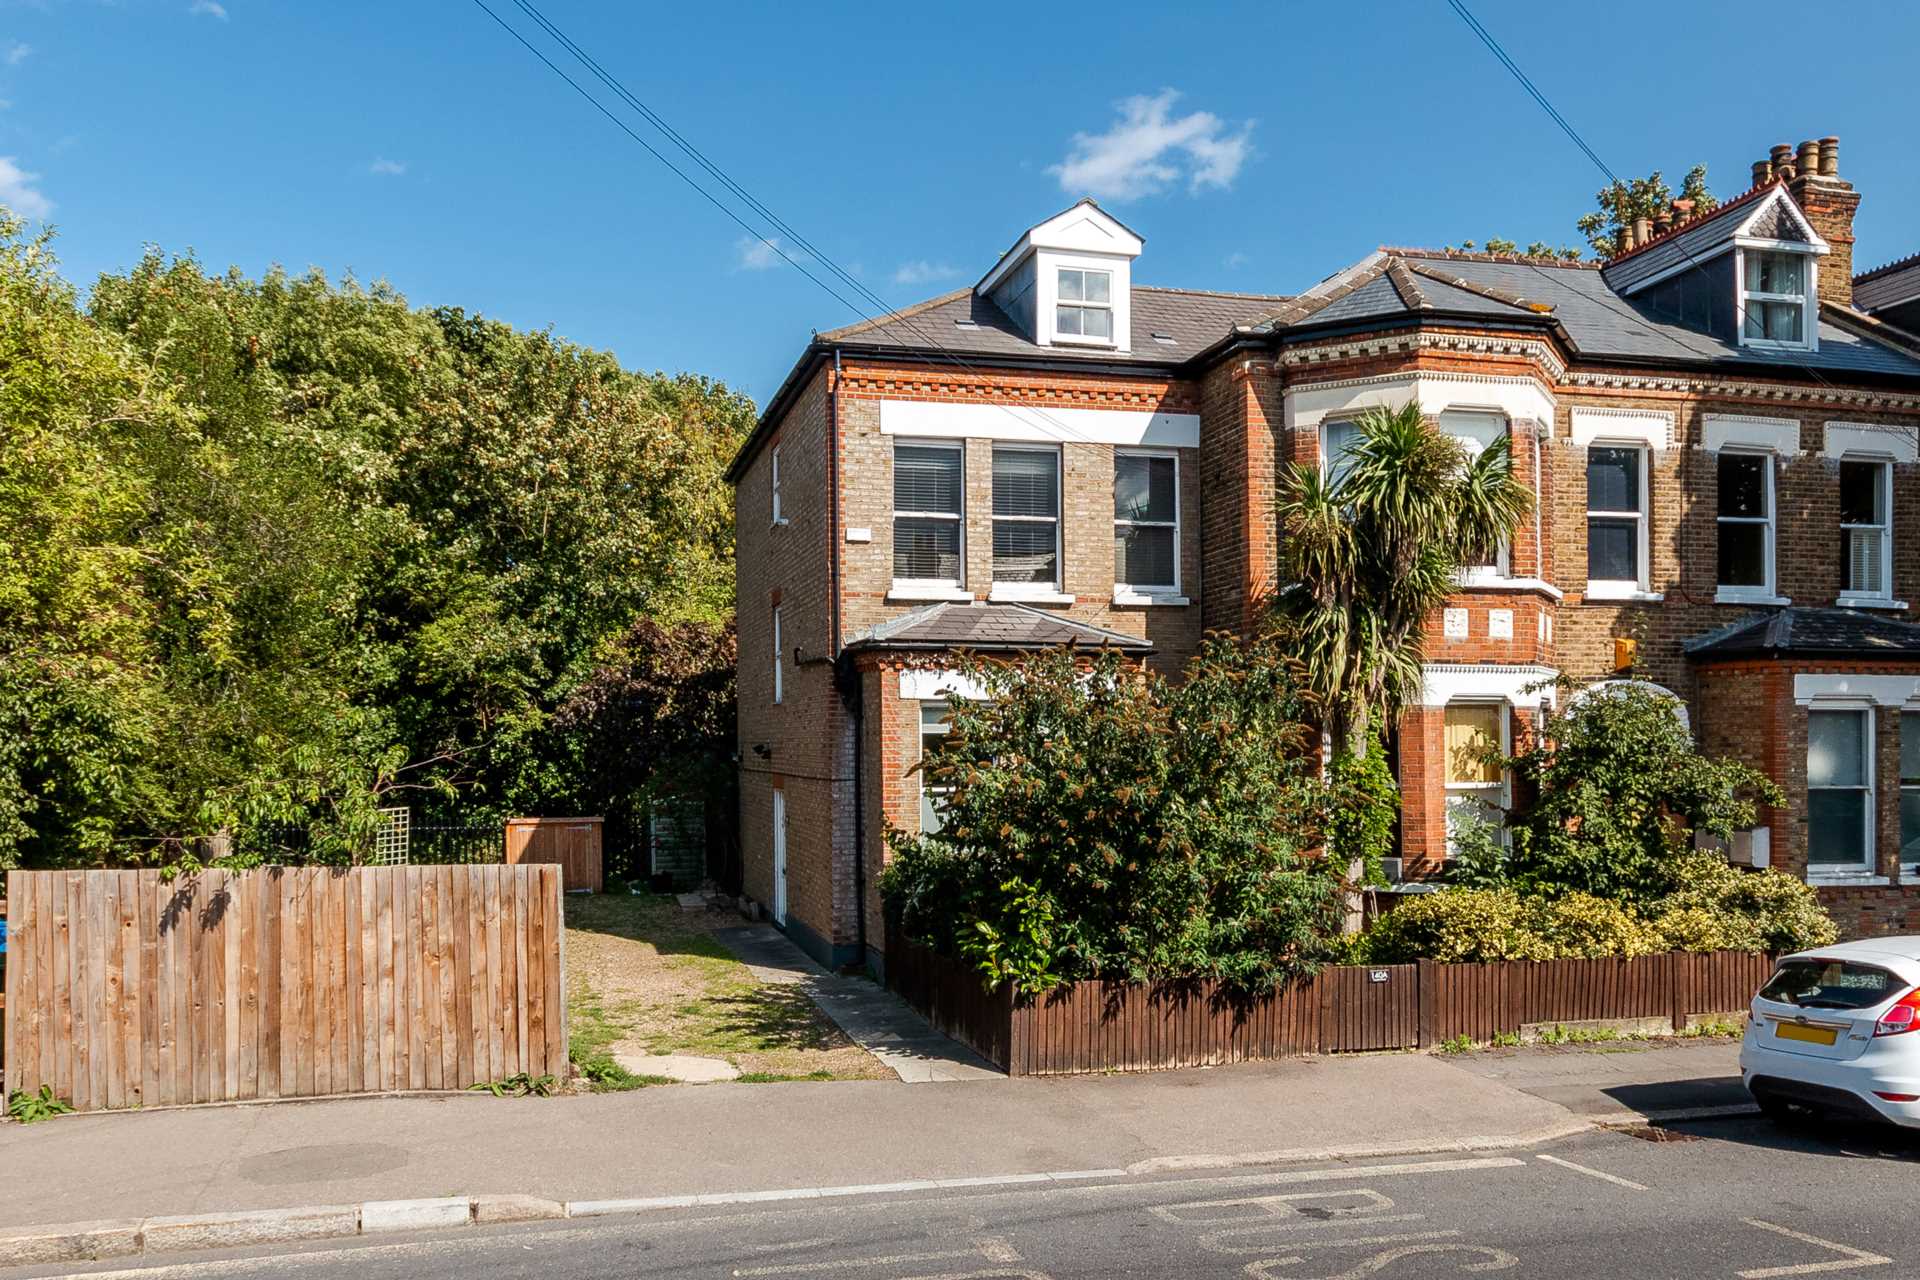 Croxted Road, West Dulwich, SE21 8NR, Image 1